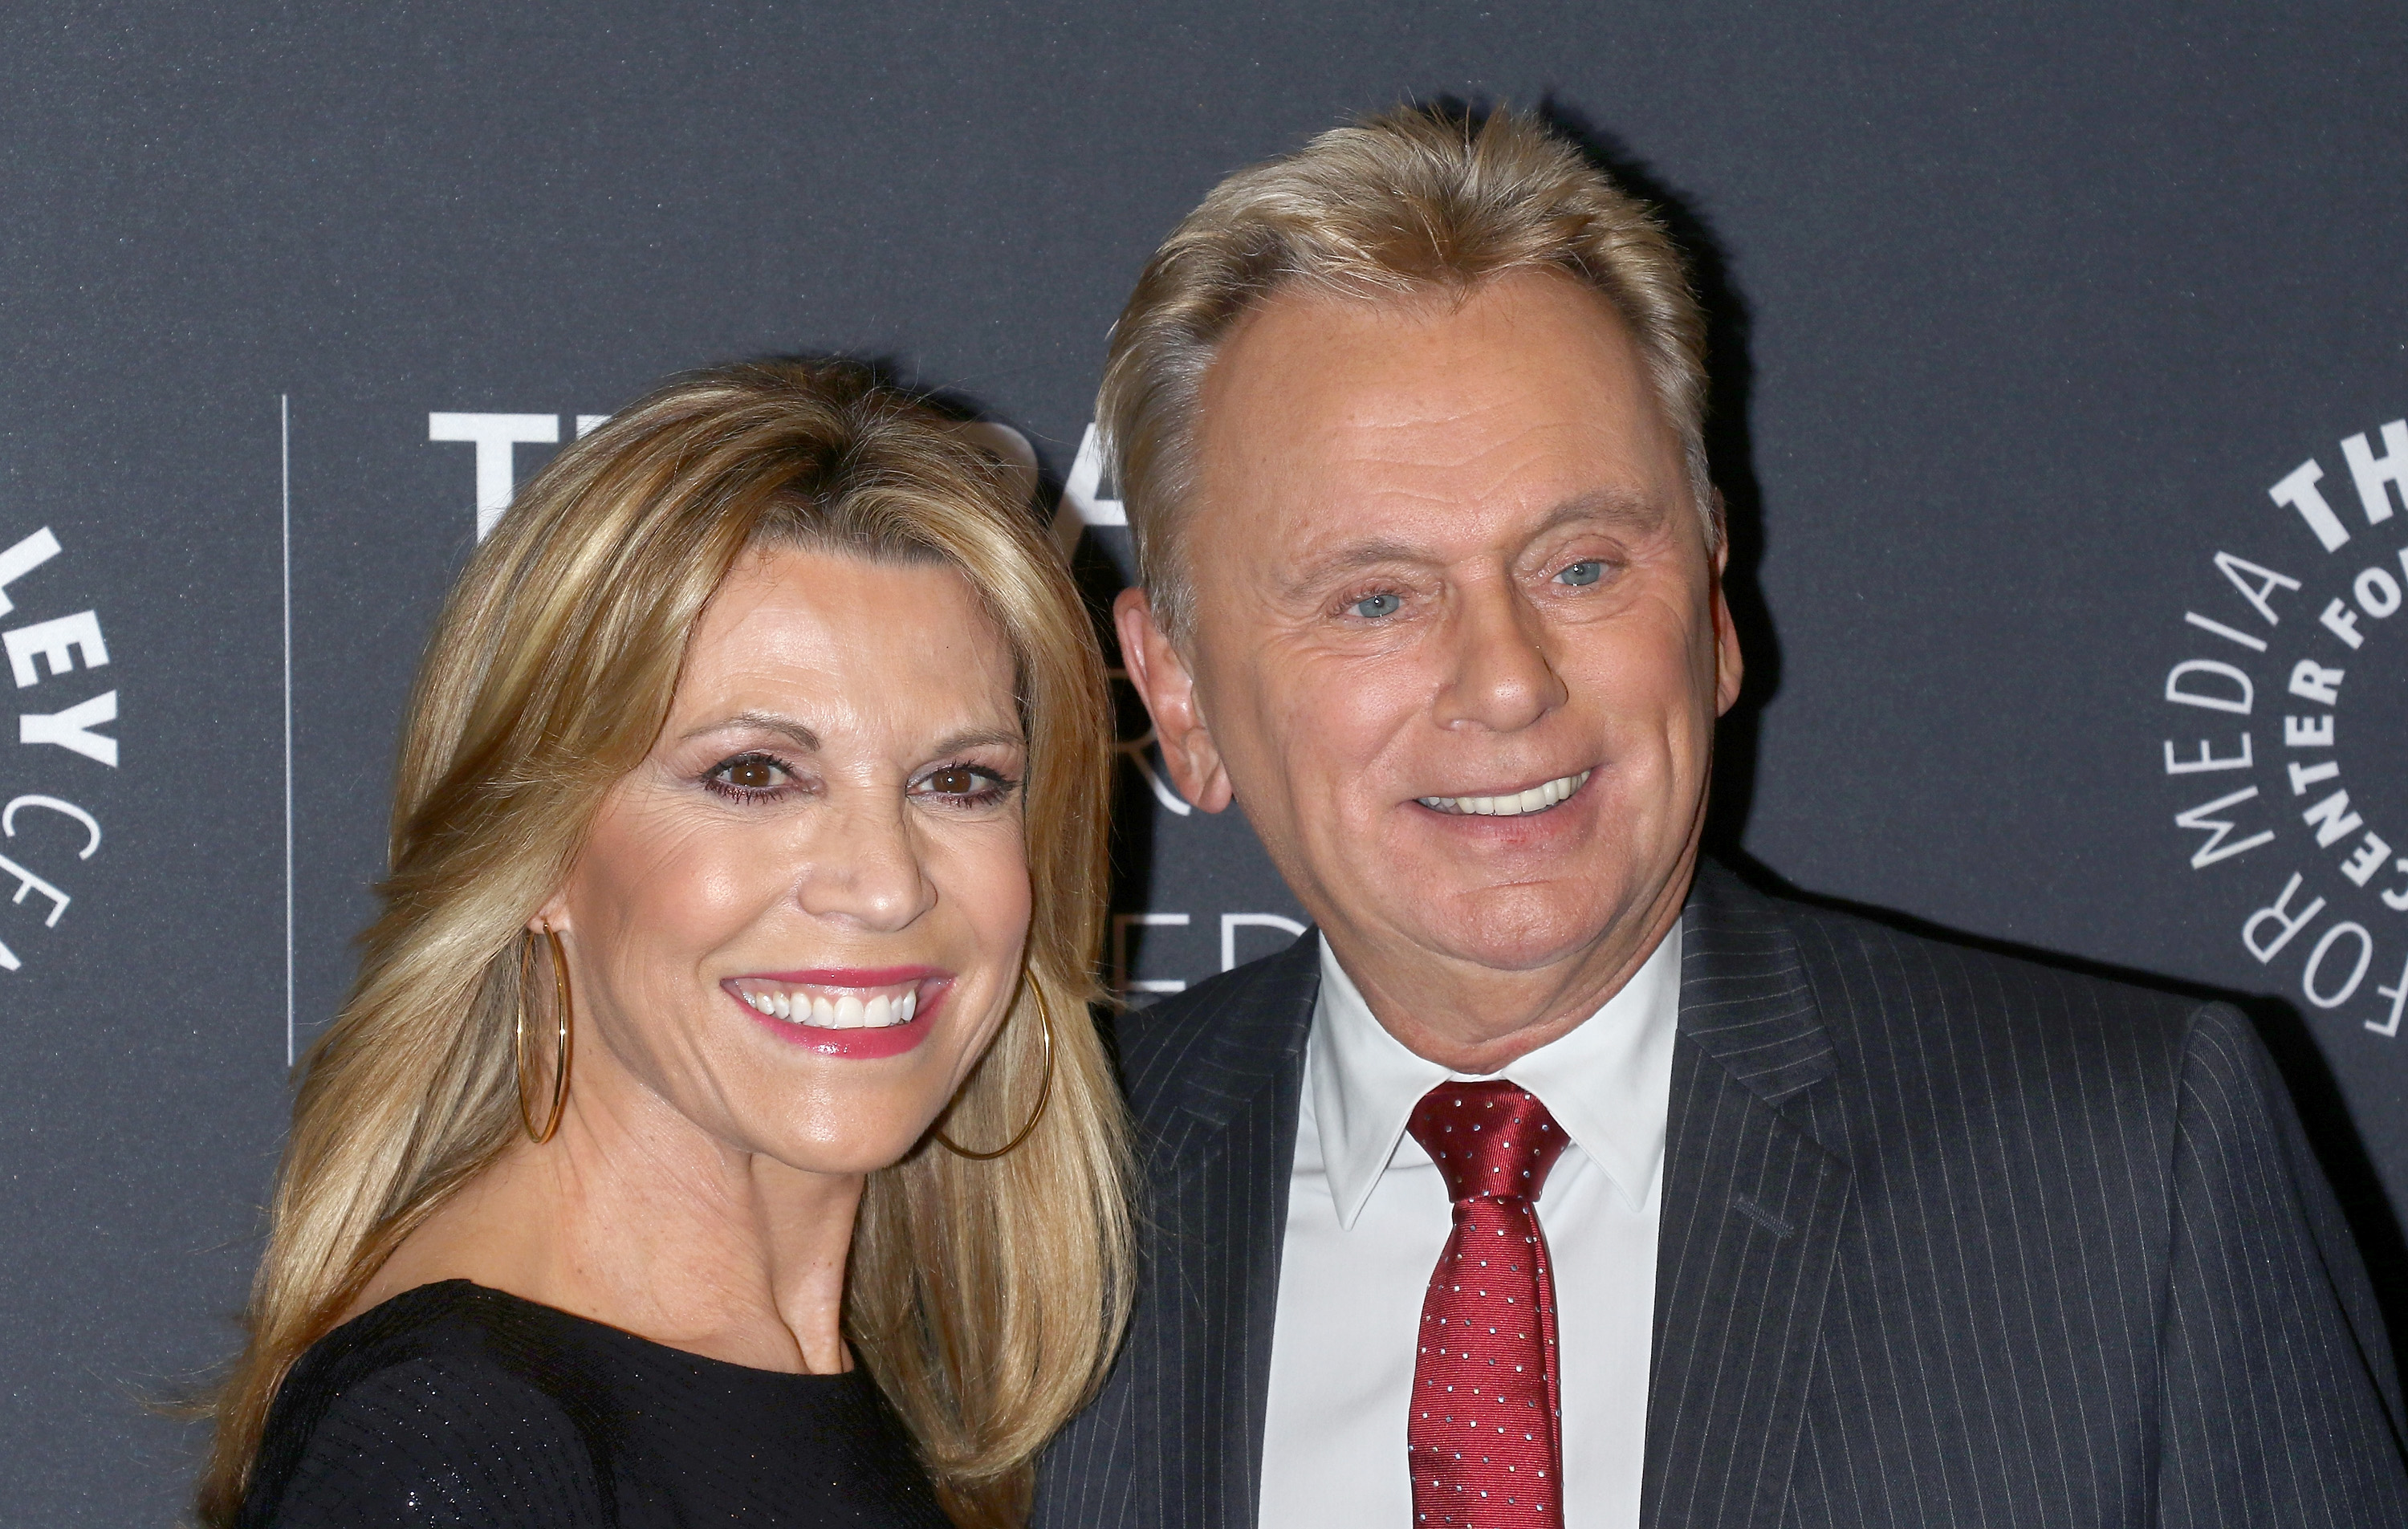 Vanna White and Pat Sajak attend The Wheel of Fortune: 35 Years as America's Game at The Paley Center for Media in New York City on November 15, 2017 | Source: Getty Images